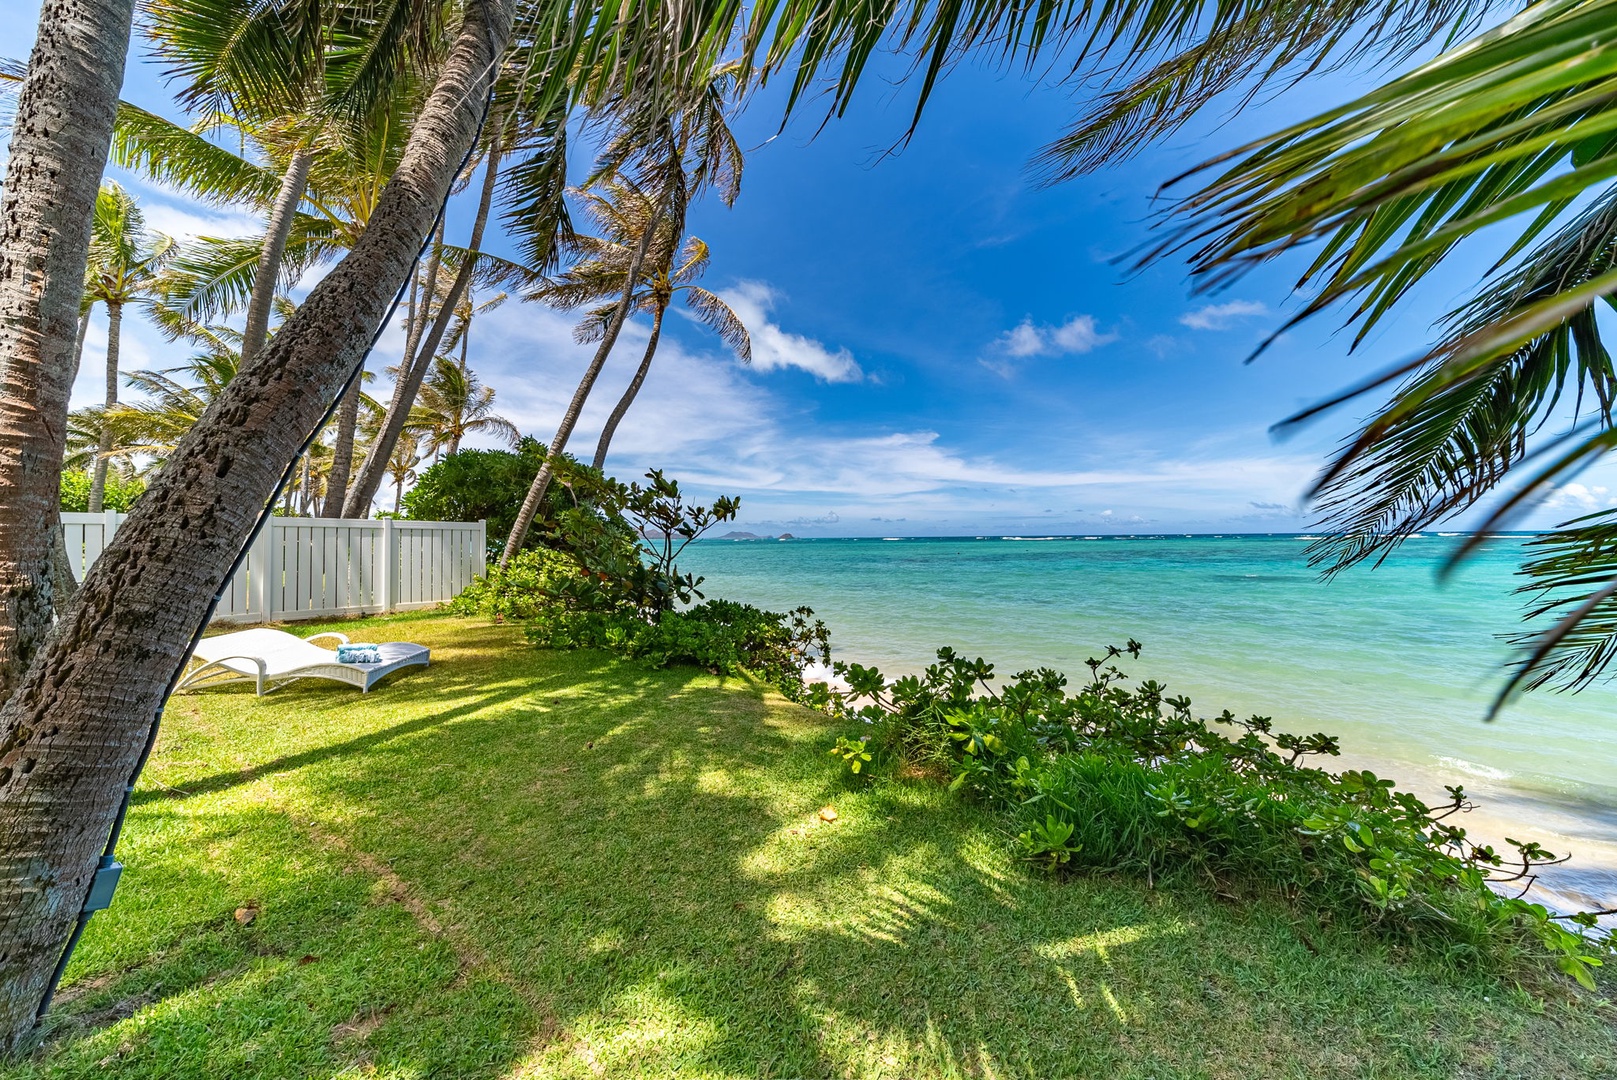 Waimanalo Vacation Rentals, Mana Kai at Waimanalo - Relax on the chaise lounge amidst a lush grassy expanse, with the luxurious home and majestic mountains framing the perfect backdrop.